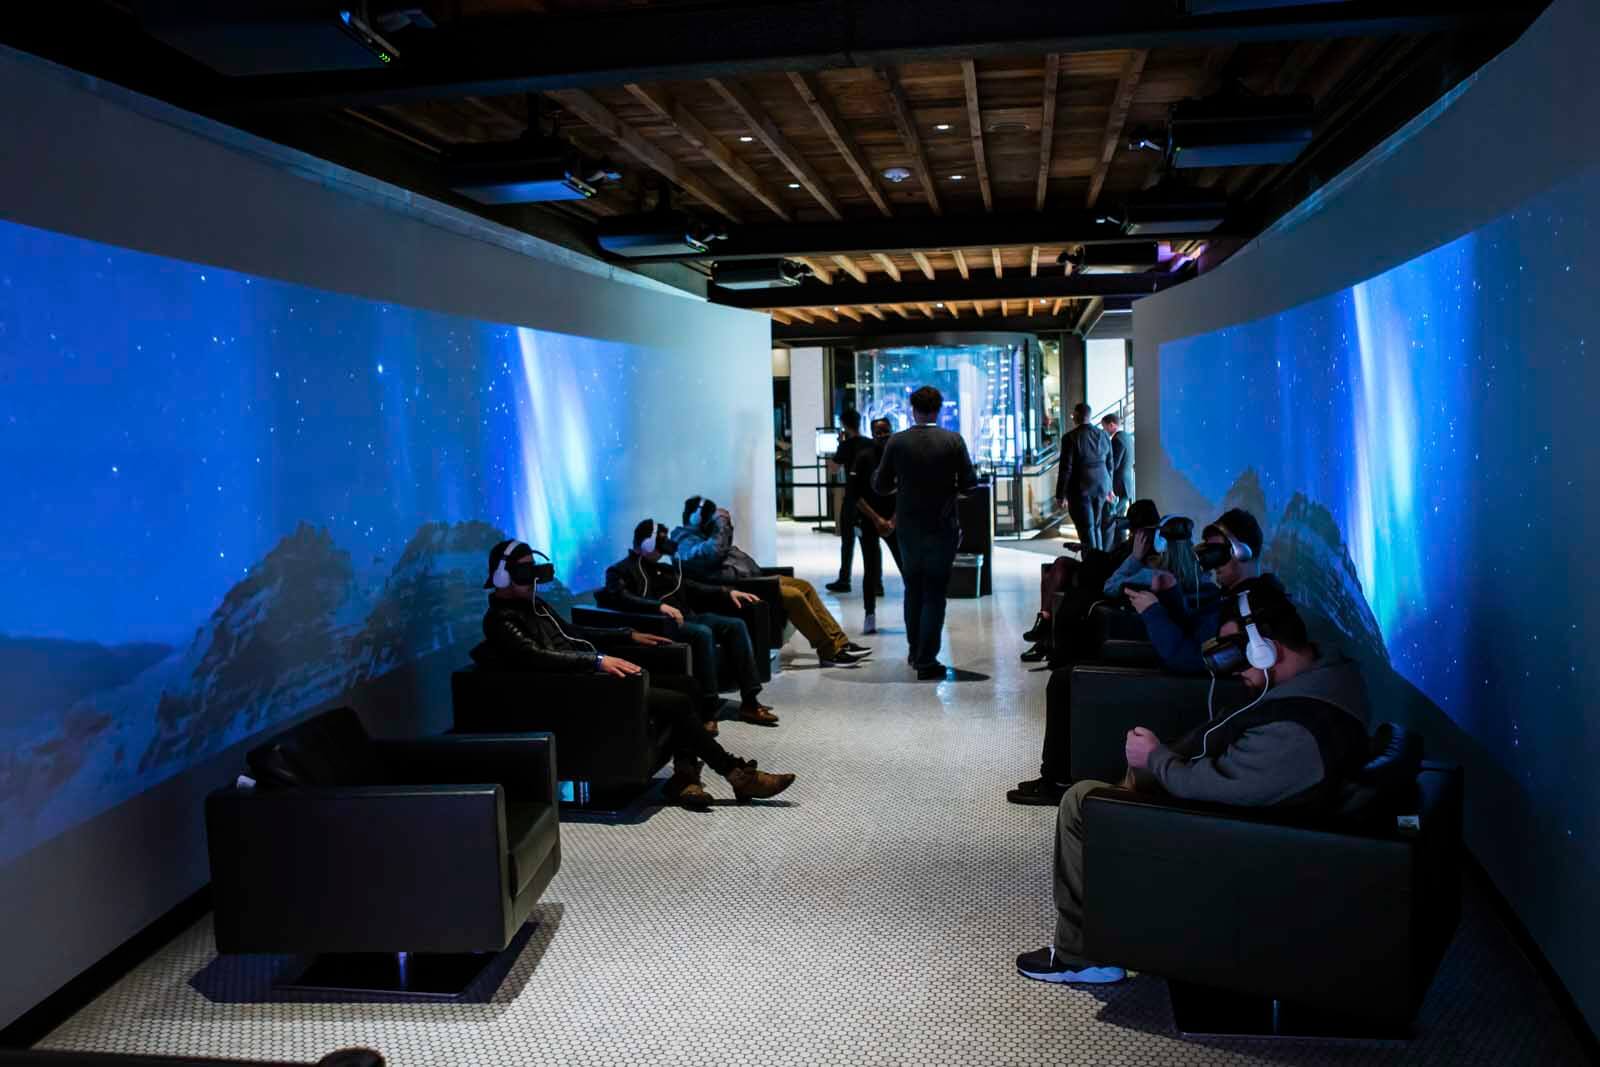 The VR Room at Samsung 837 in New York City